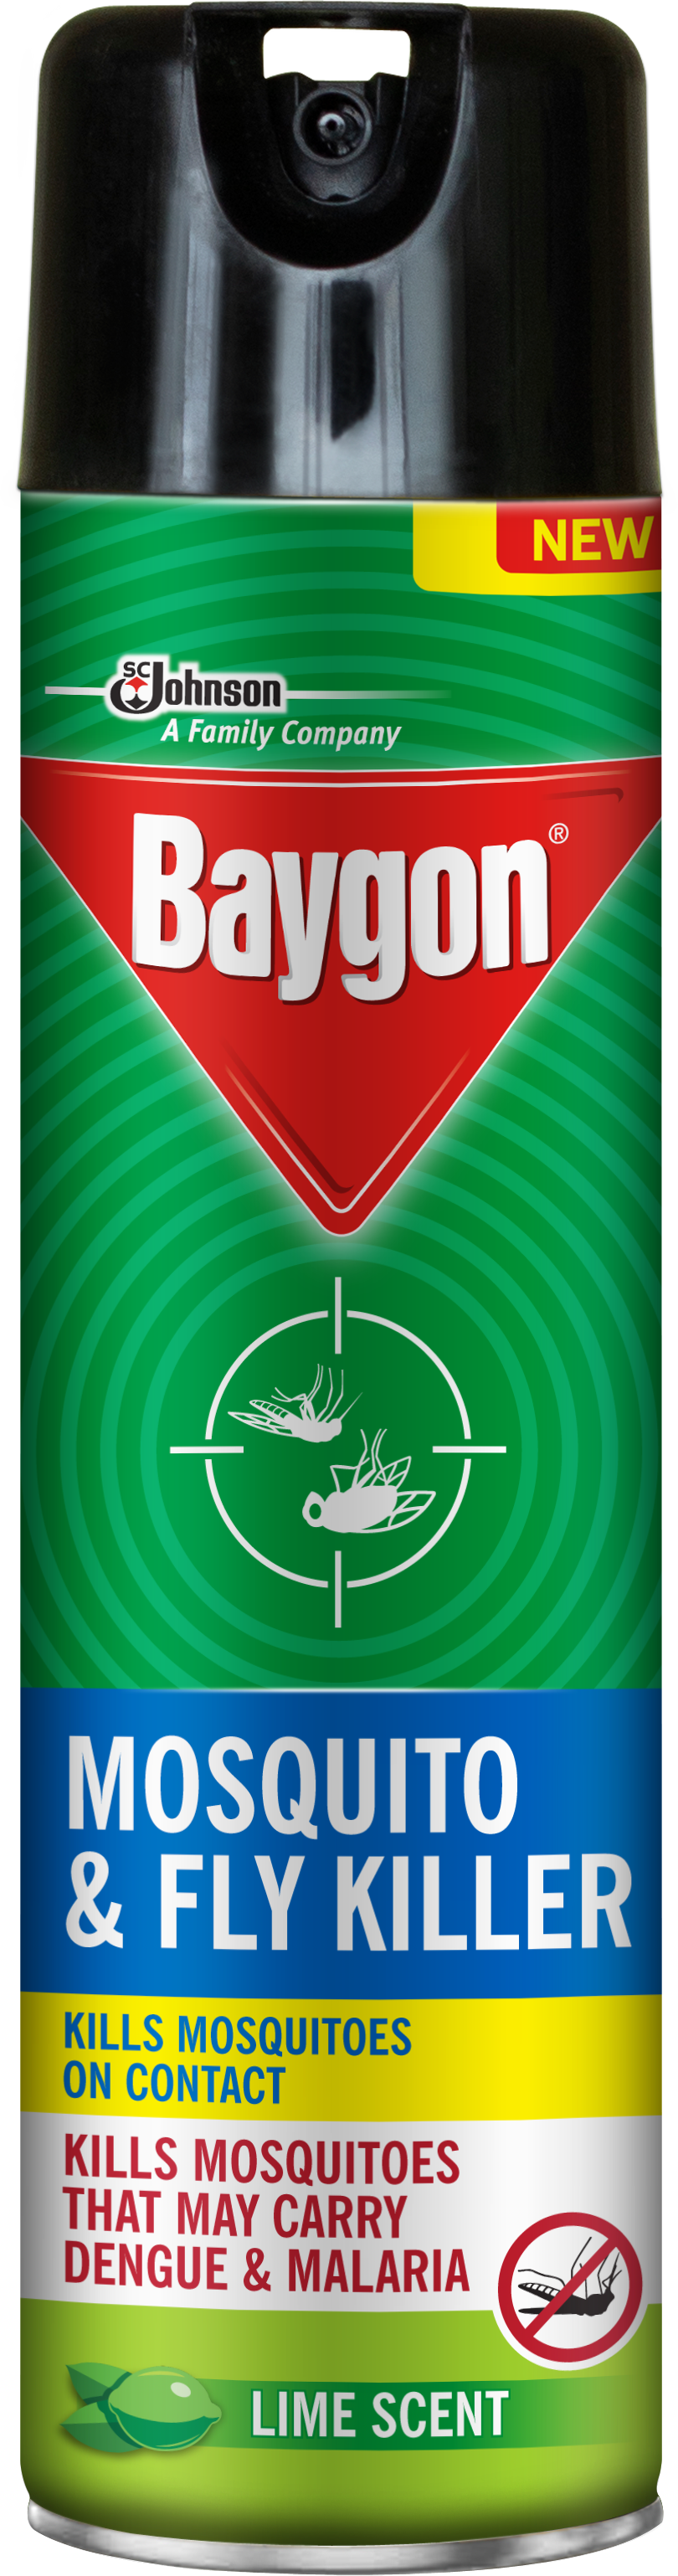 Baygon Mosquito and Fly Killer.